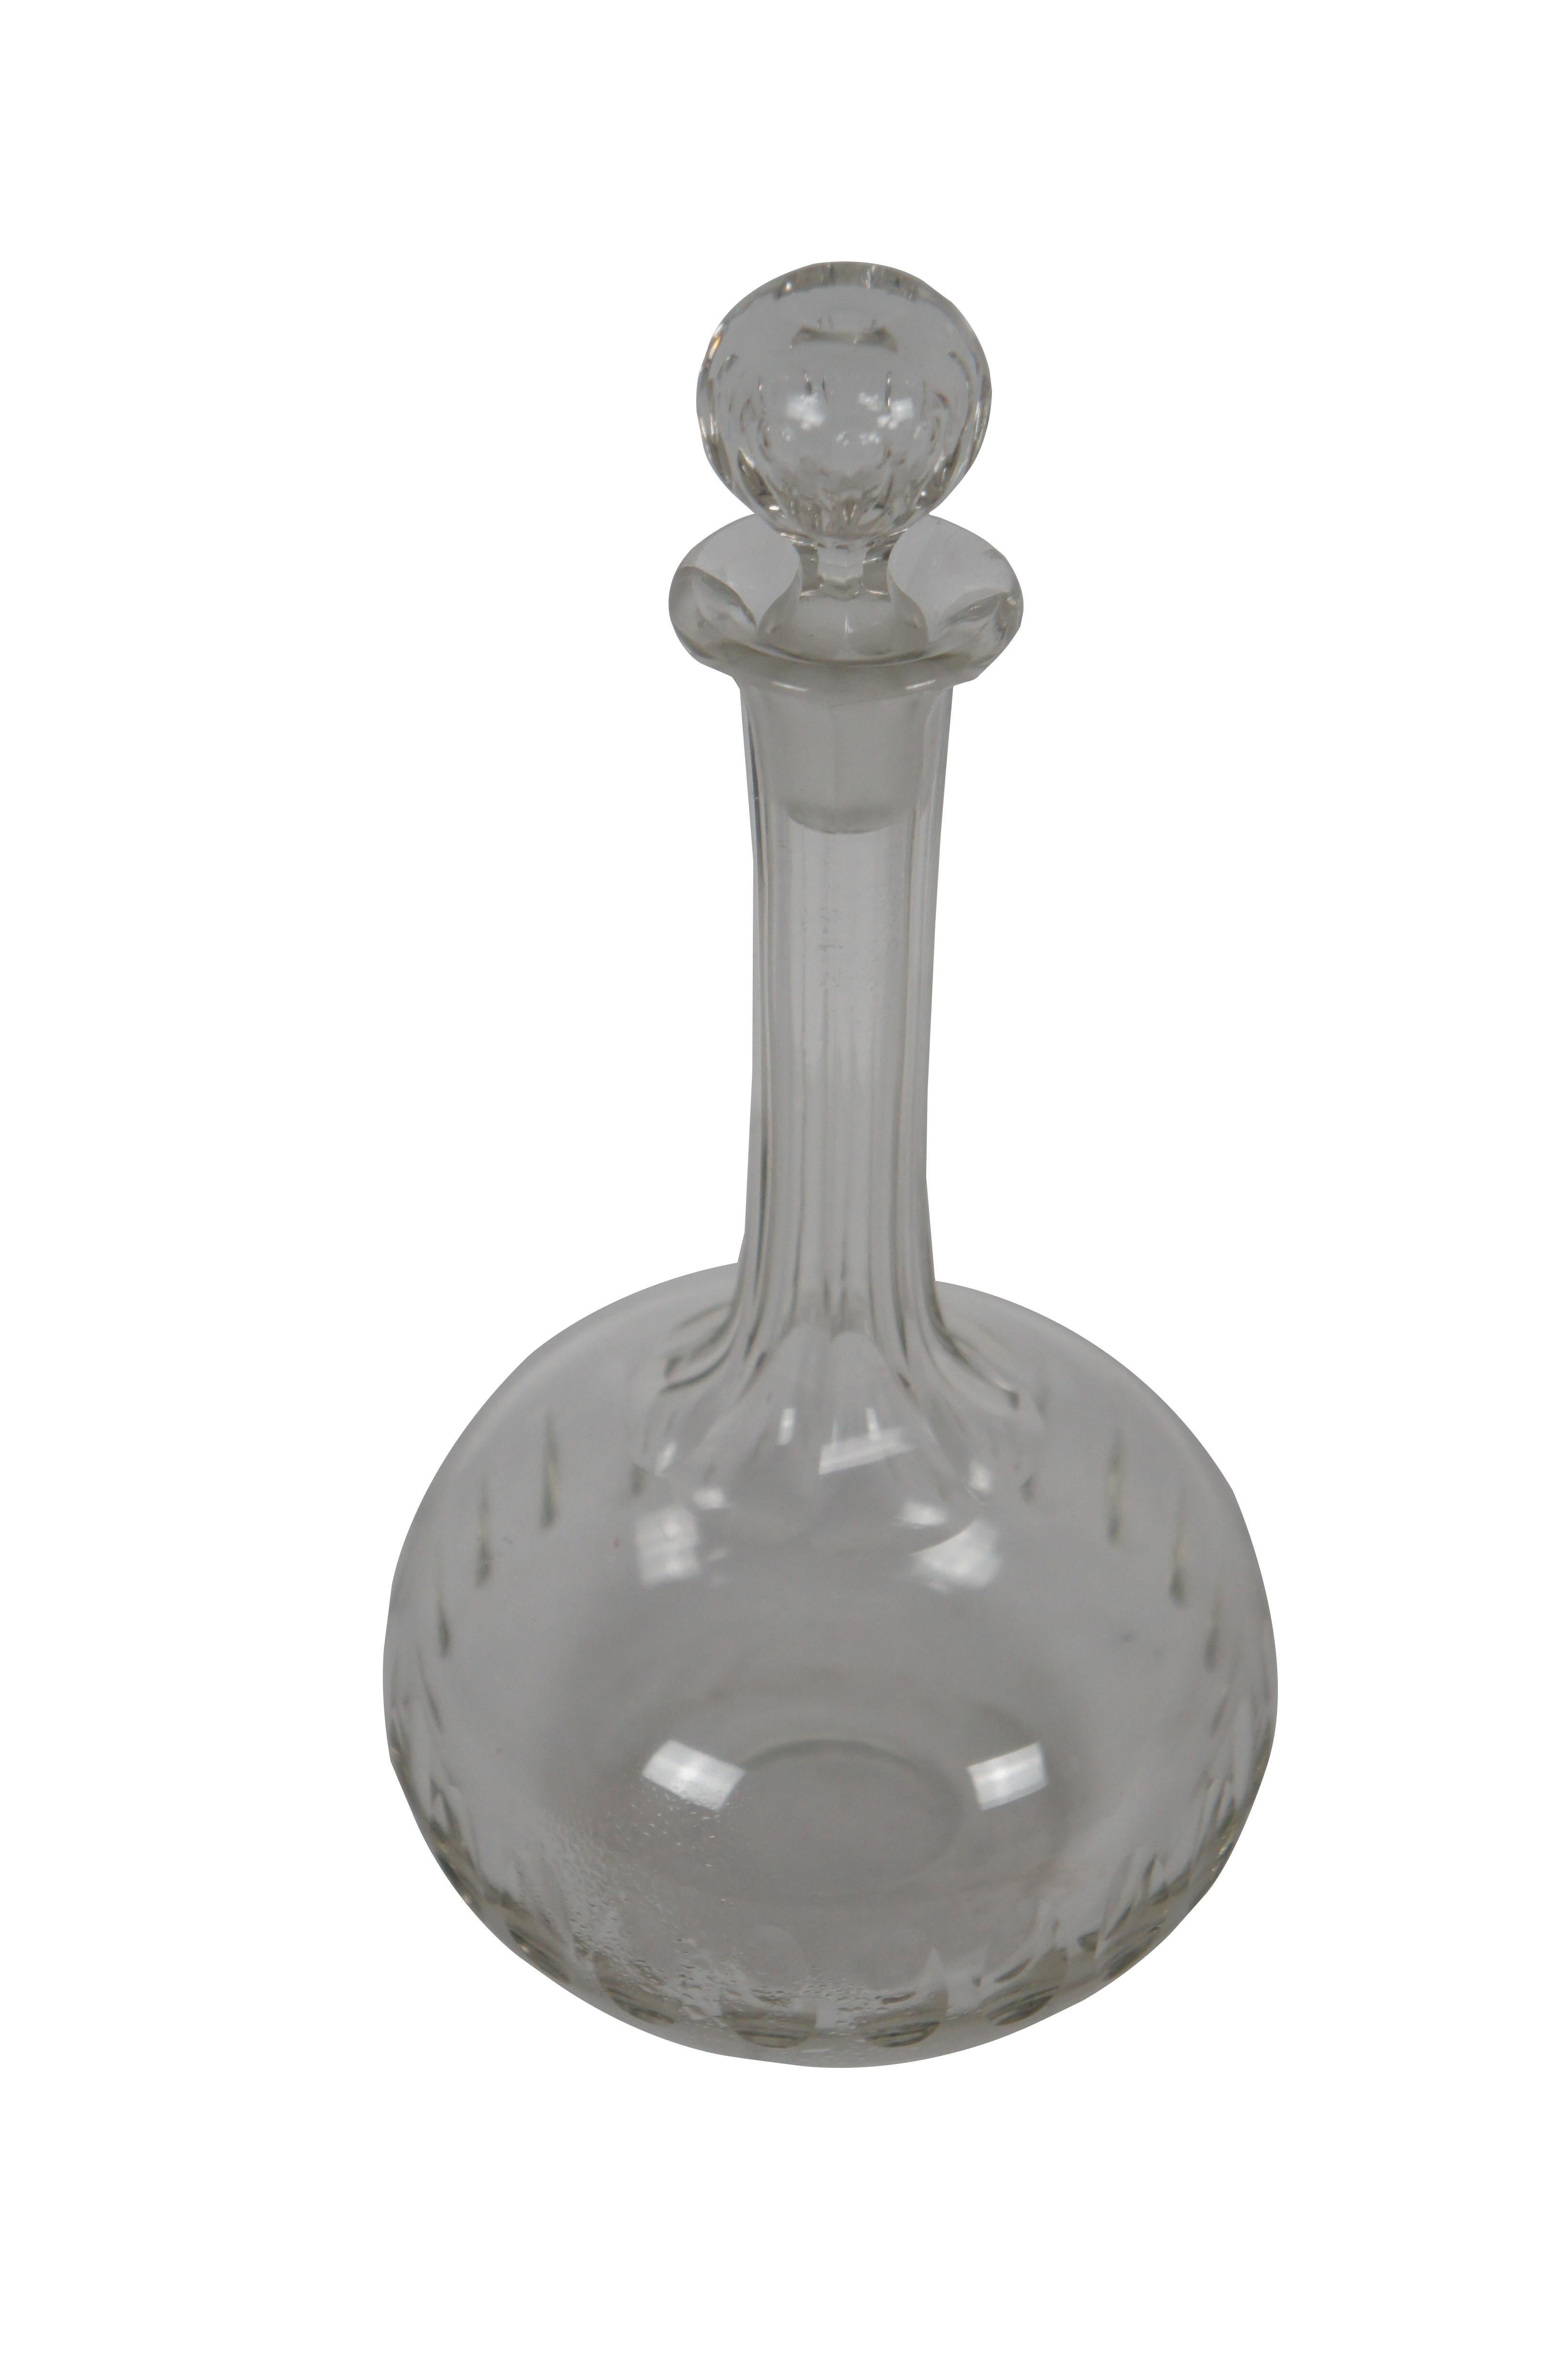 Early 20th century clear cut glass decanter and stopper. Bulb shaped base decorated with a ring of thumbprint dots, narrow faceted neck and orb shaped stopper also imprinted with ovals.

Dimensions:
4.5